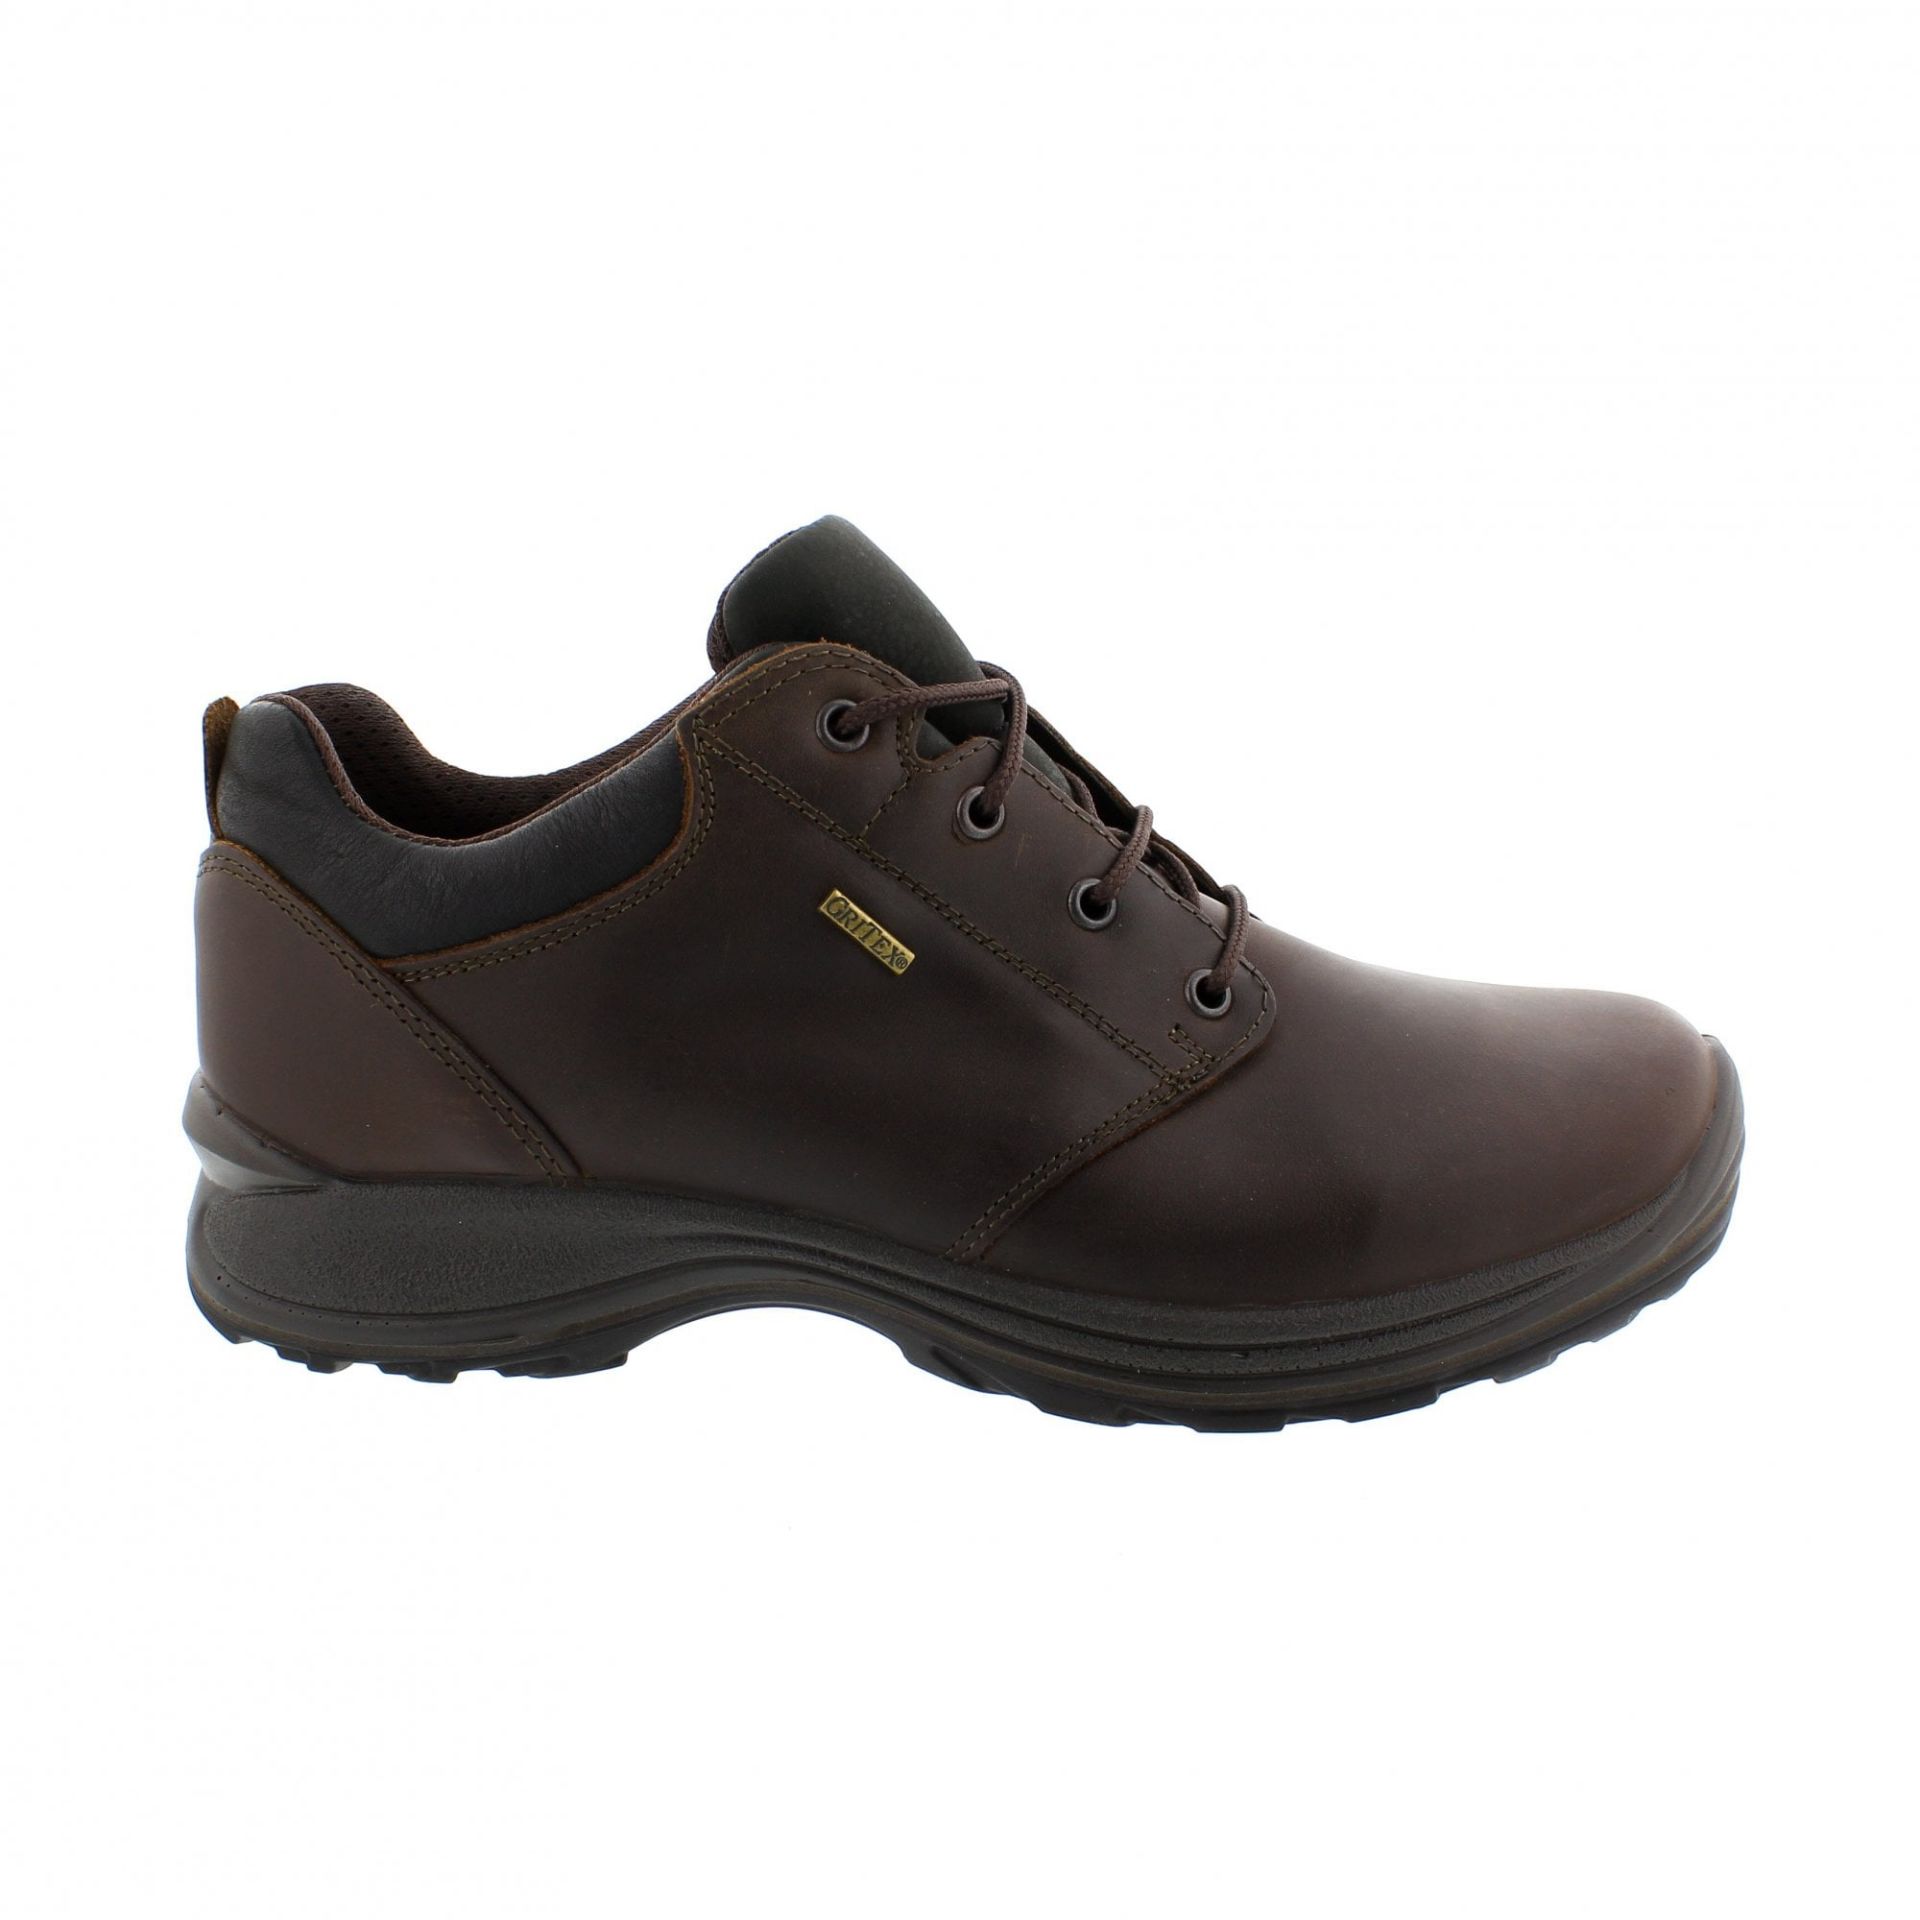 1 x Pair of Men's Grisport Brown Leather GriTex Shoes - Rogerson Footwear - Brand New and Boxed - - Image 8 of 9